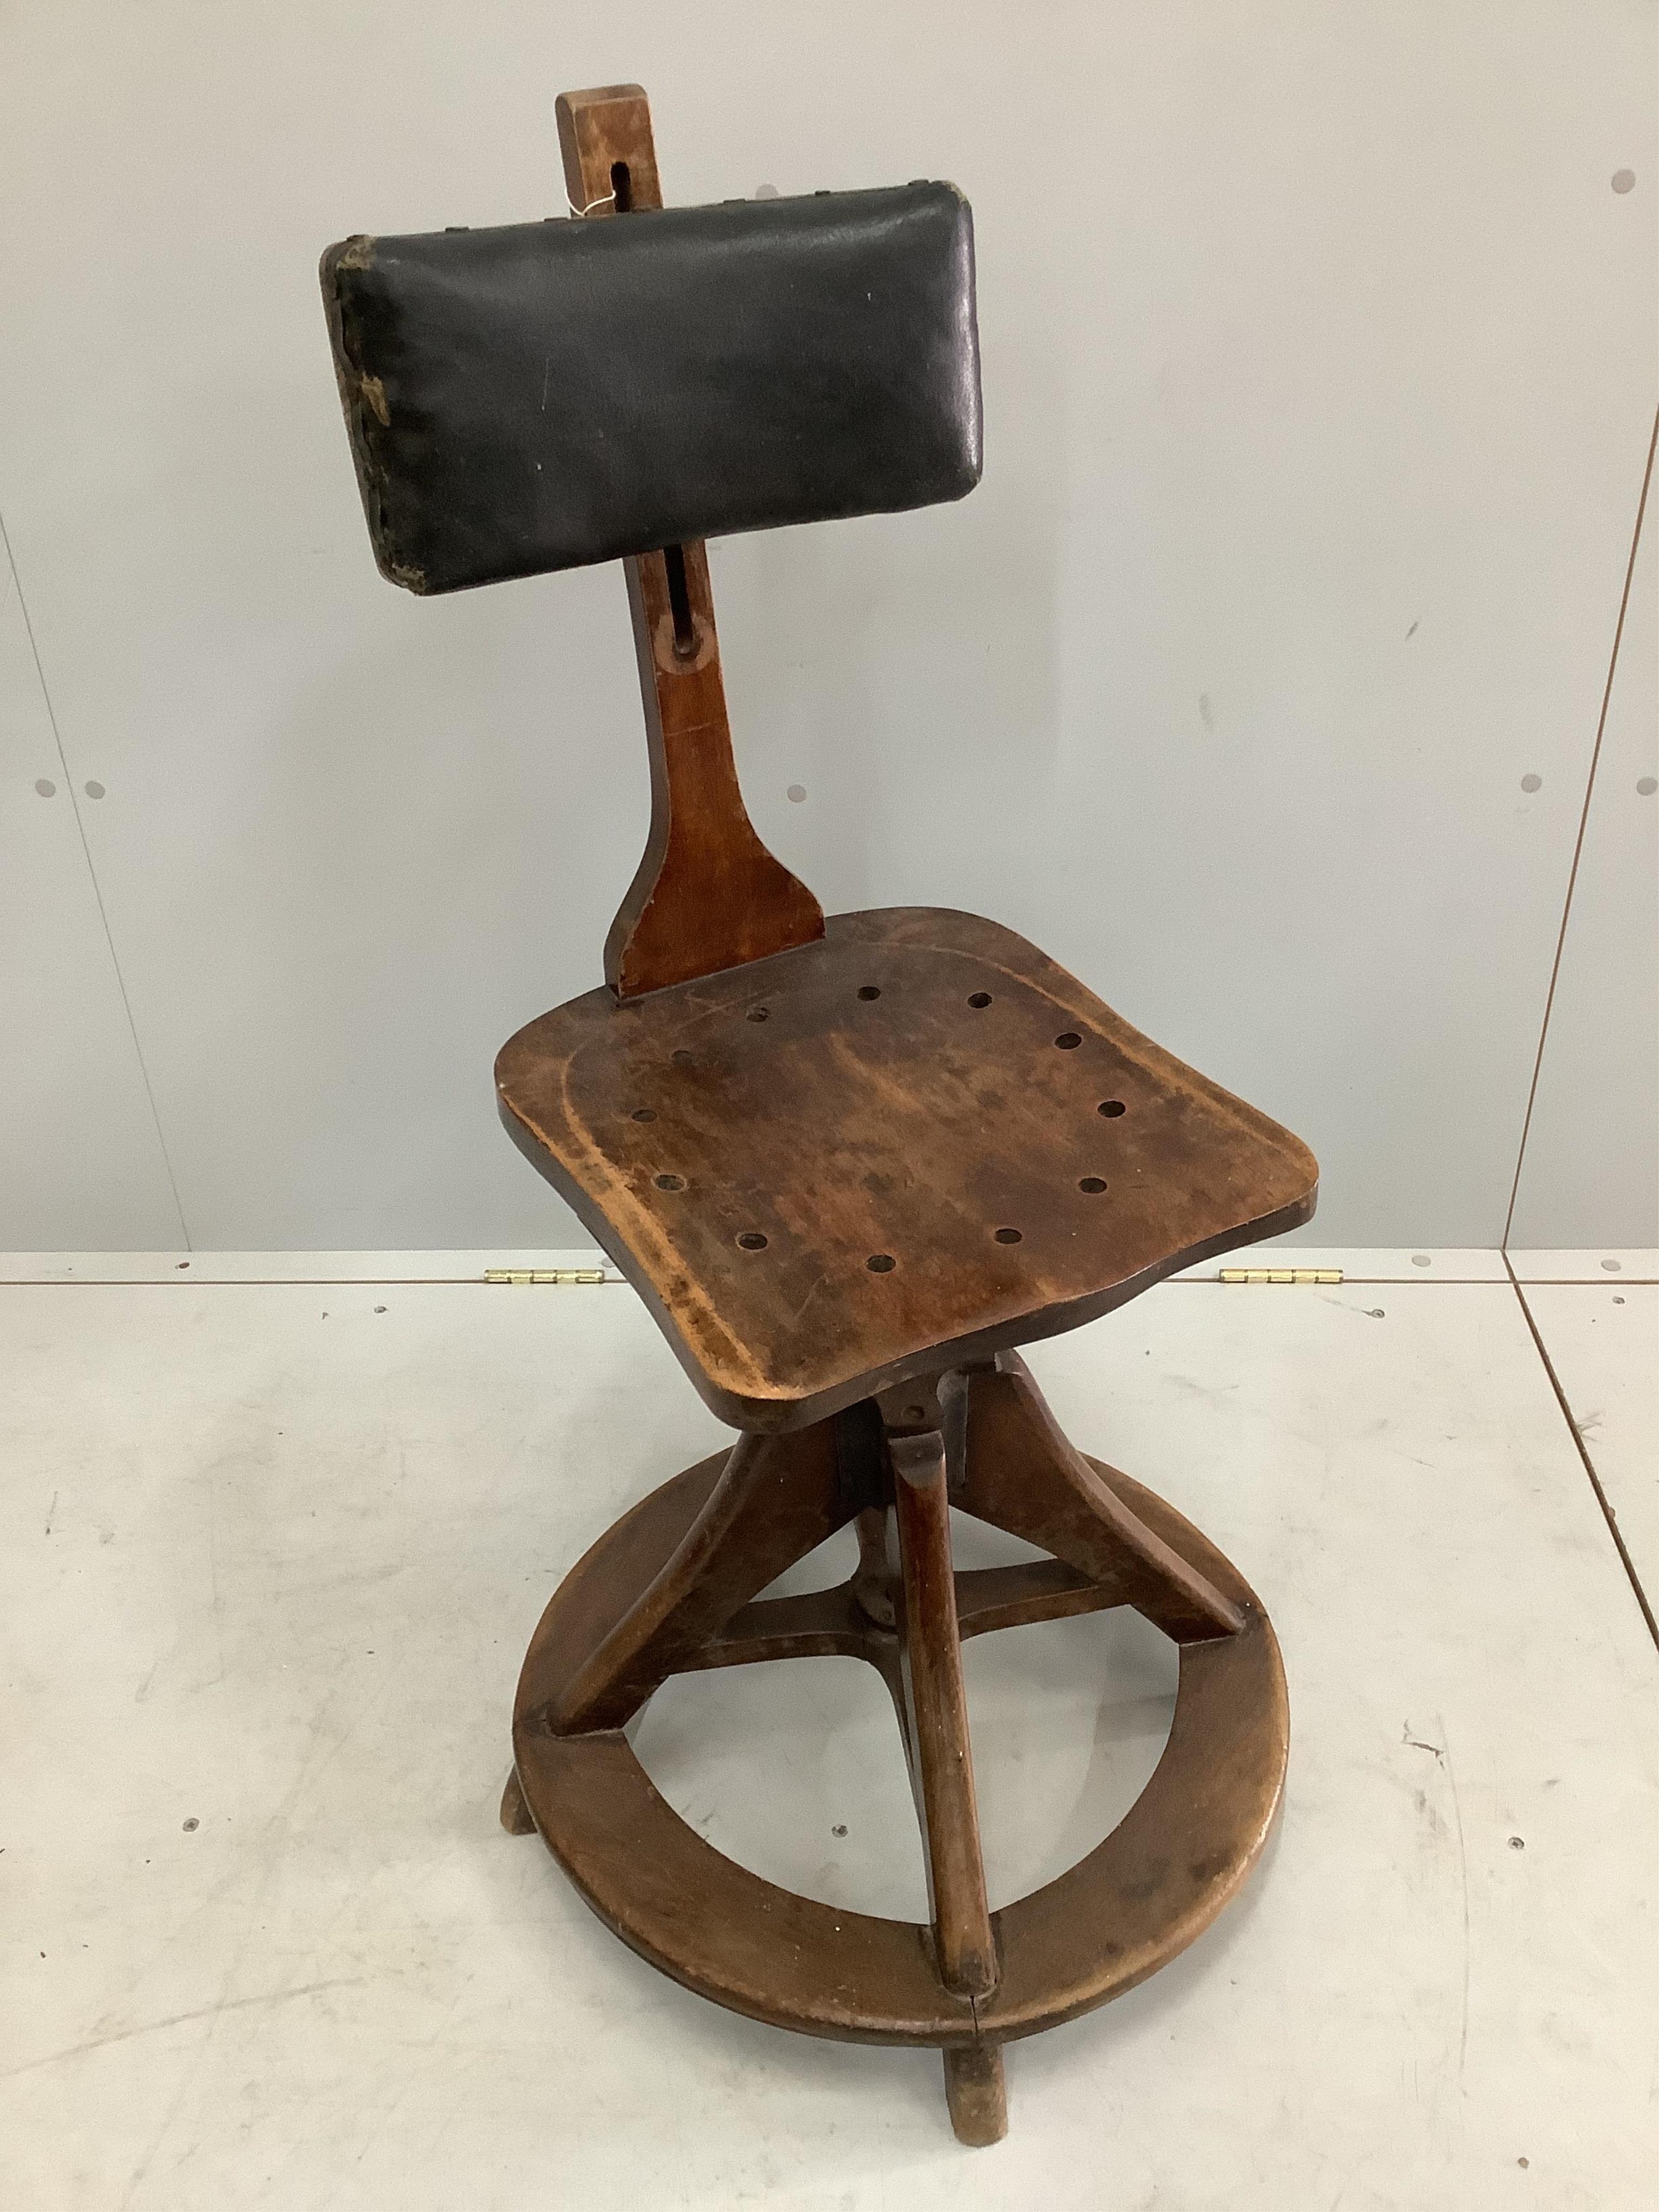 An early 20th century Glenister architect's or artist's adjustable chair, width 50cm, depth 50cm, height 100cm. Condition - fair